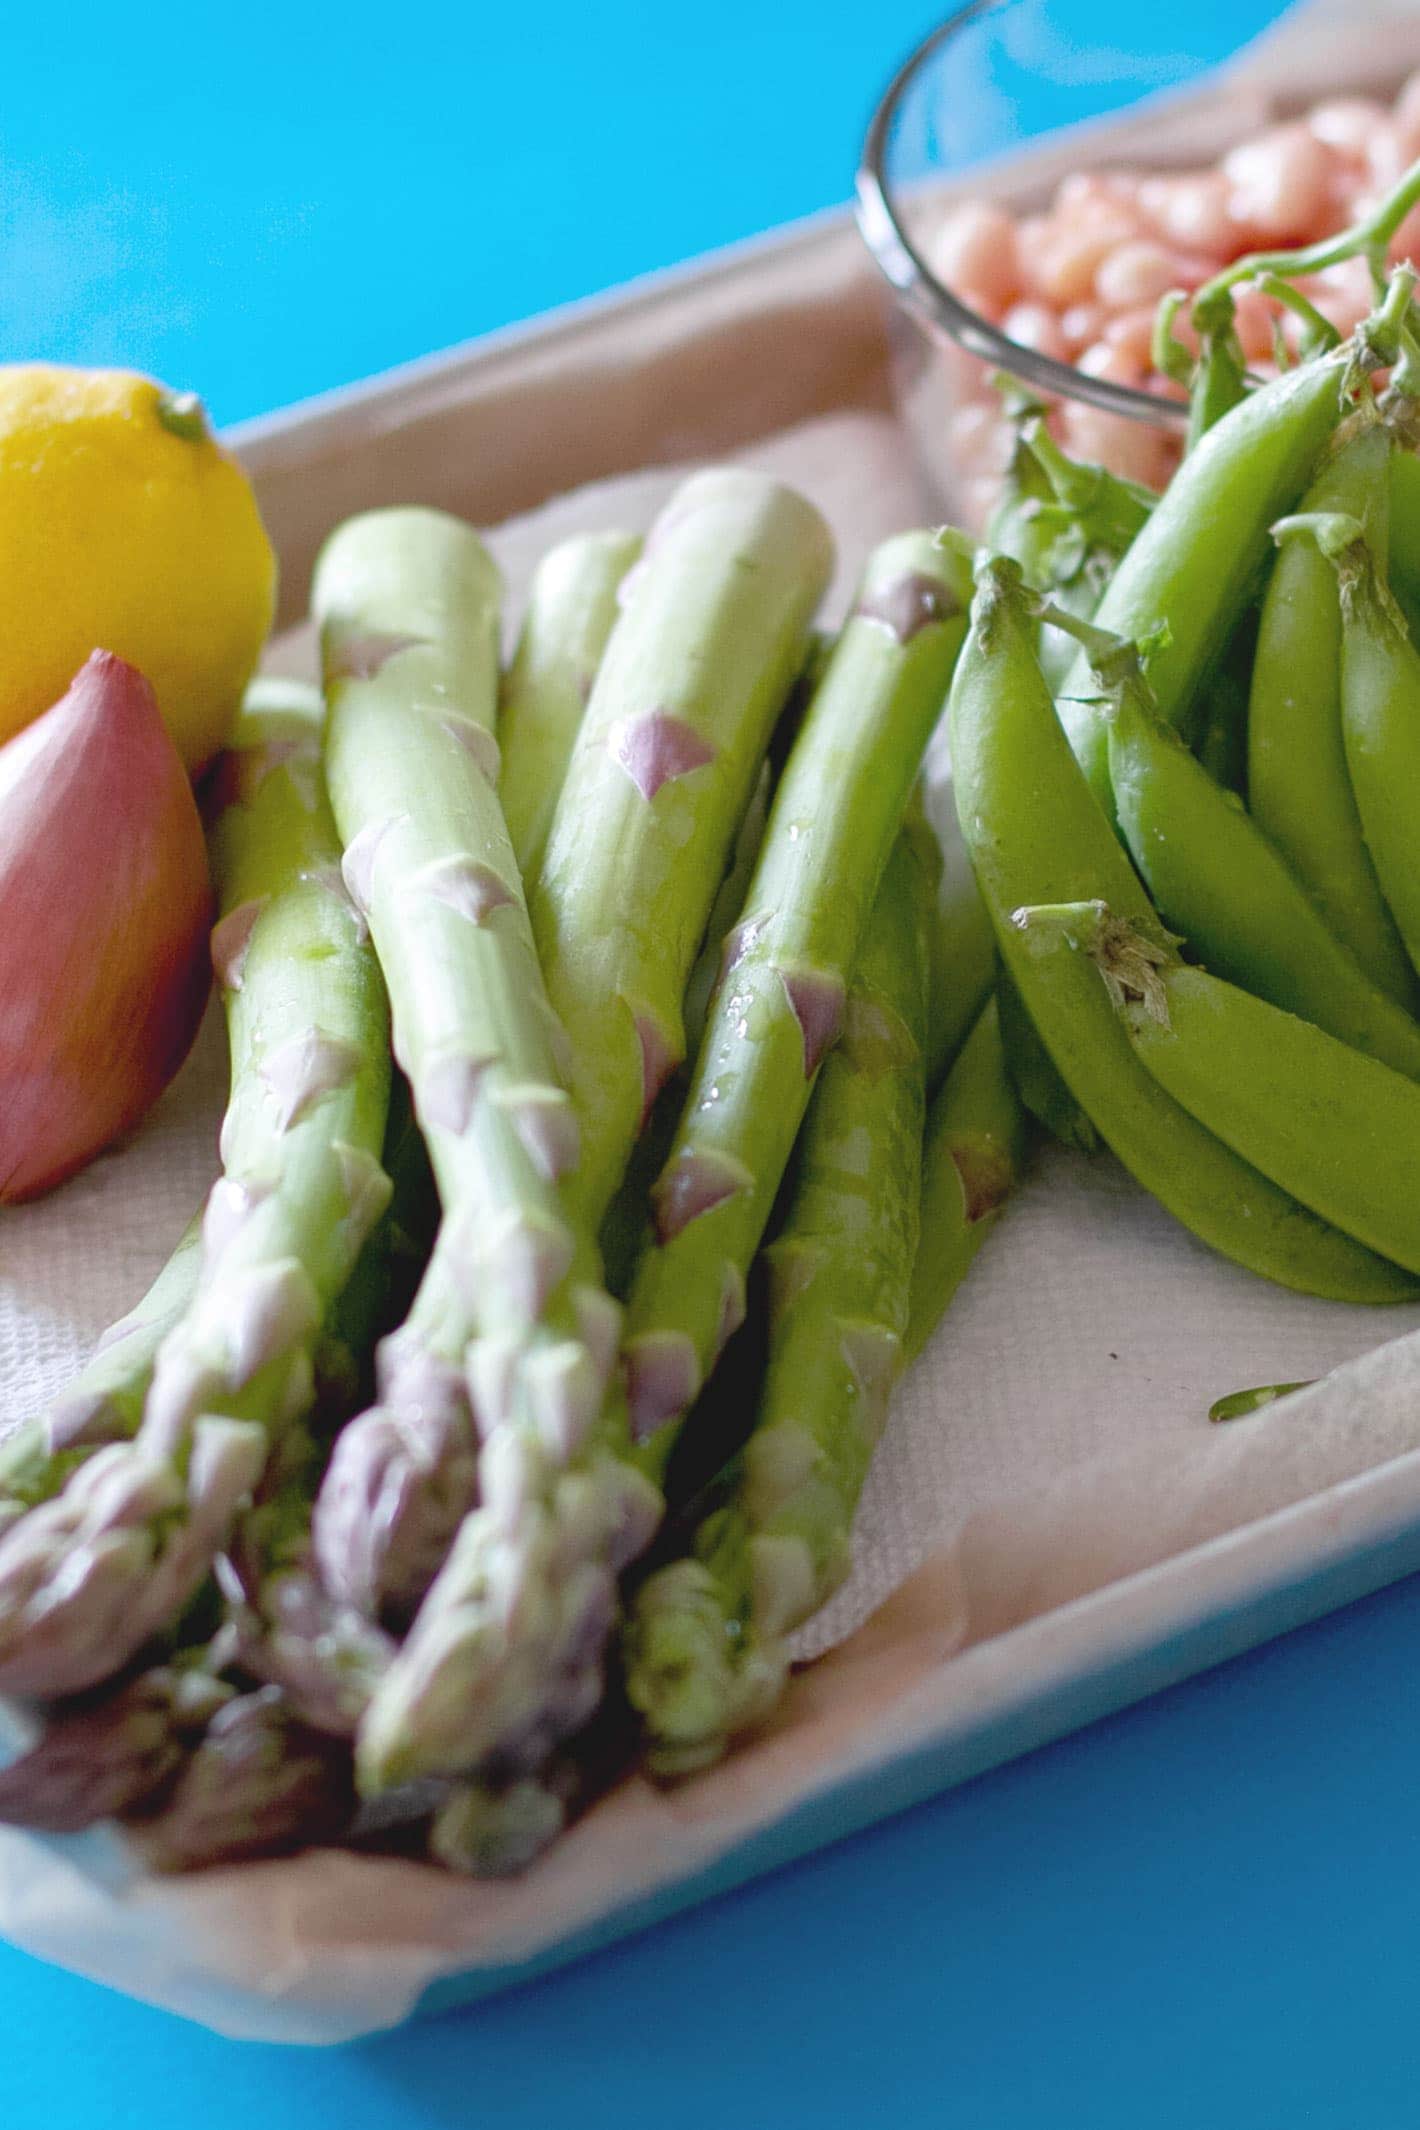 Fresh asparagus stalks, sugar snap peas, a shallot and lemon, and a clear bowl of white beans displayed on a parchment paper covered small sheet tray over a bright blue surface.